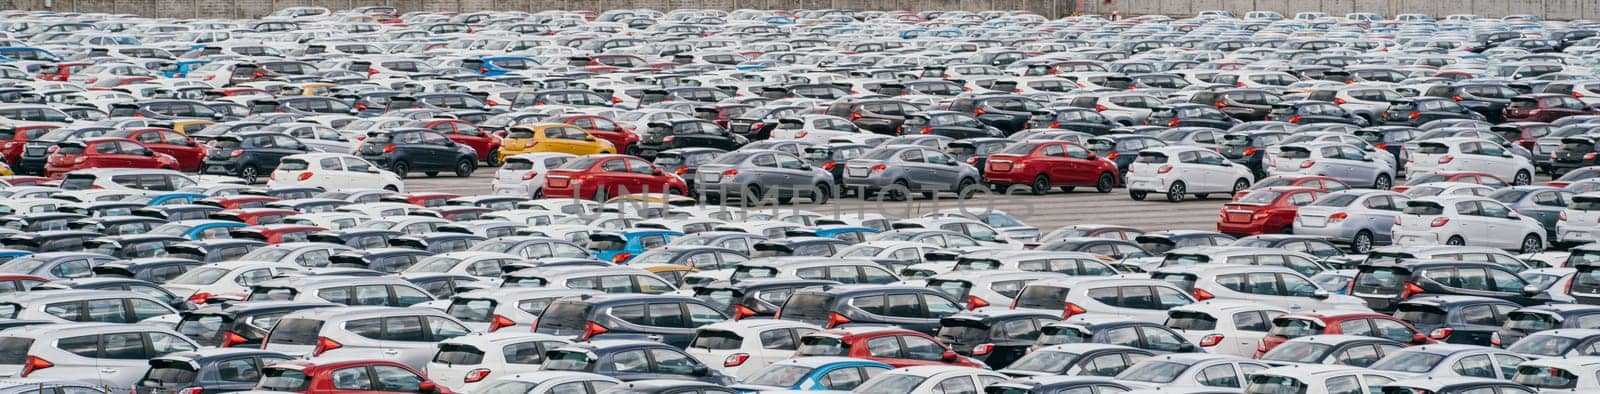 Lamchabang, Thailand - July 02, 2023 Rows of new cars grace the distribution center of a sunny car factory. A top view reveals a full parking garage bustling with industry and modern technology.